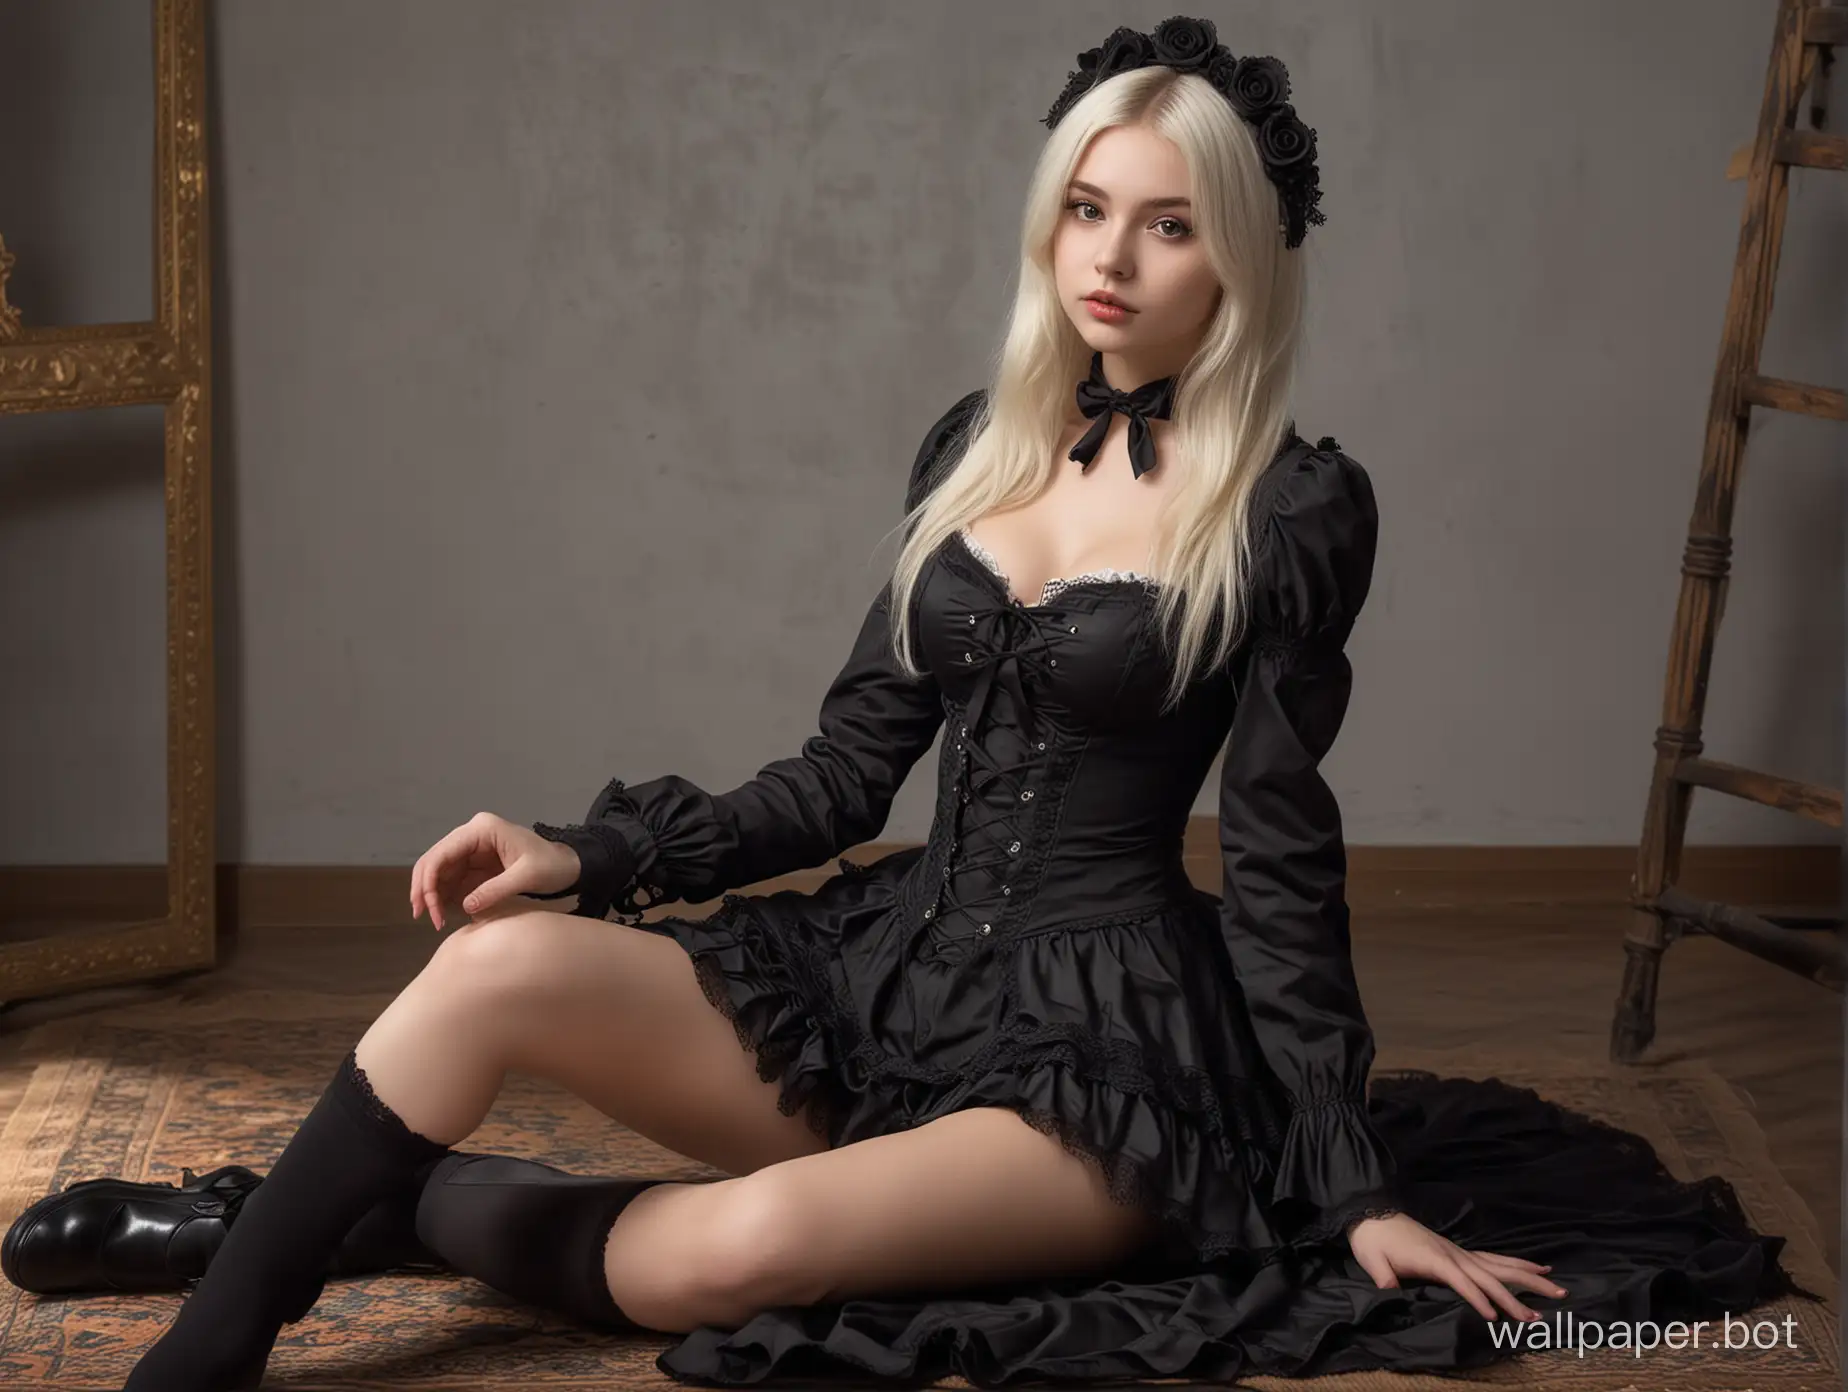 Photo of a beautiful 18 y.o. russian model, full body, wide shot, detailed skin, perfect hips, perfect body, very detailed, 4K HQ, 8K HDR, High contrast, shadows, platinum blonde hair, black gothic lolita costume, full body view, sitting with legs spread wide. show panties.